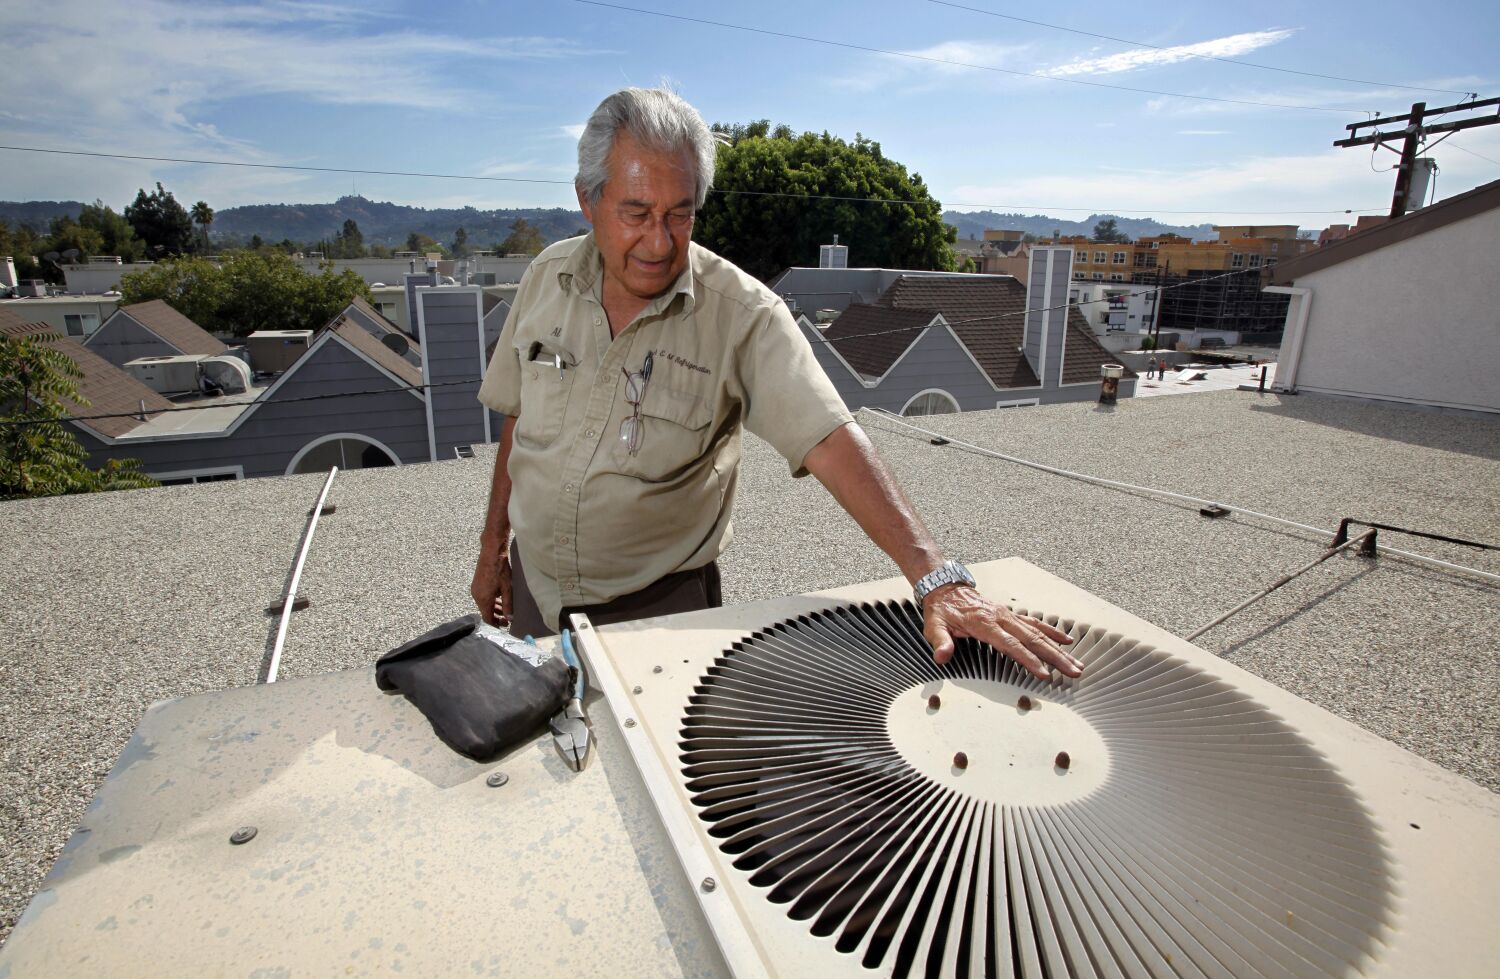 LA is studying air conditioning requirements for rental units